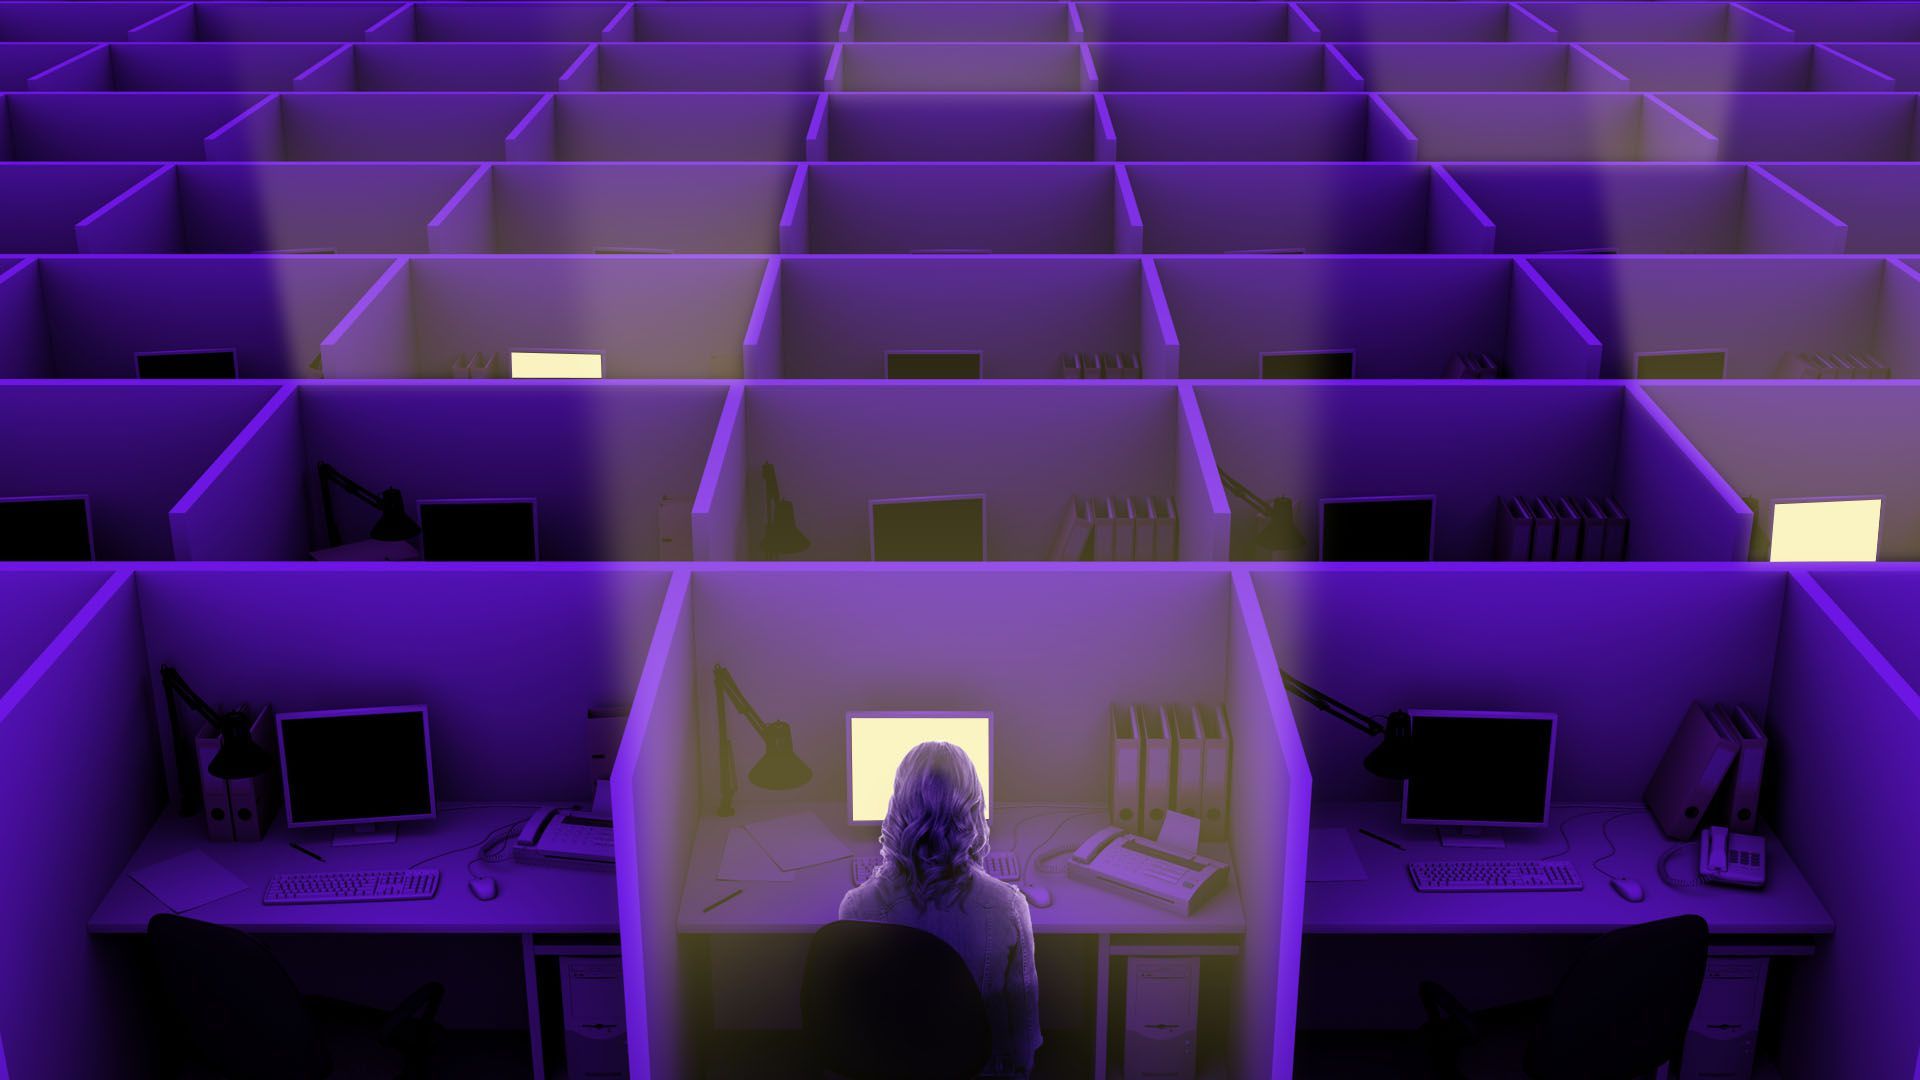 Illustration of a dark room full of cubicles, with some lit up by computer screens